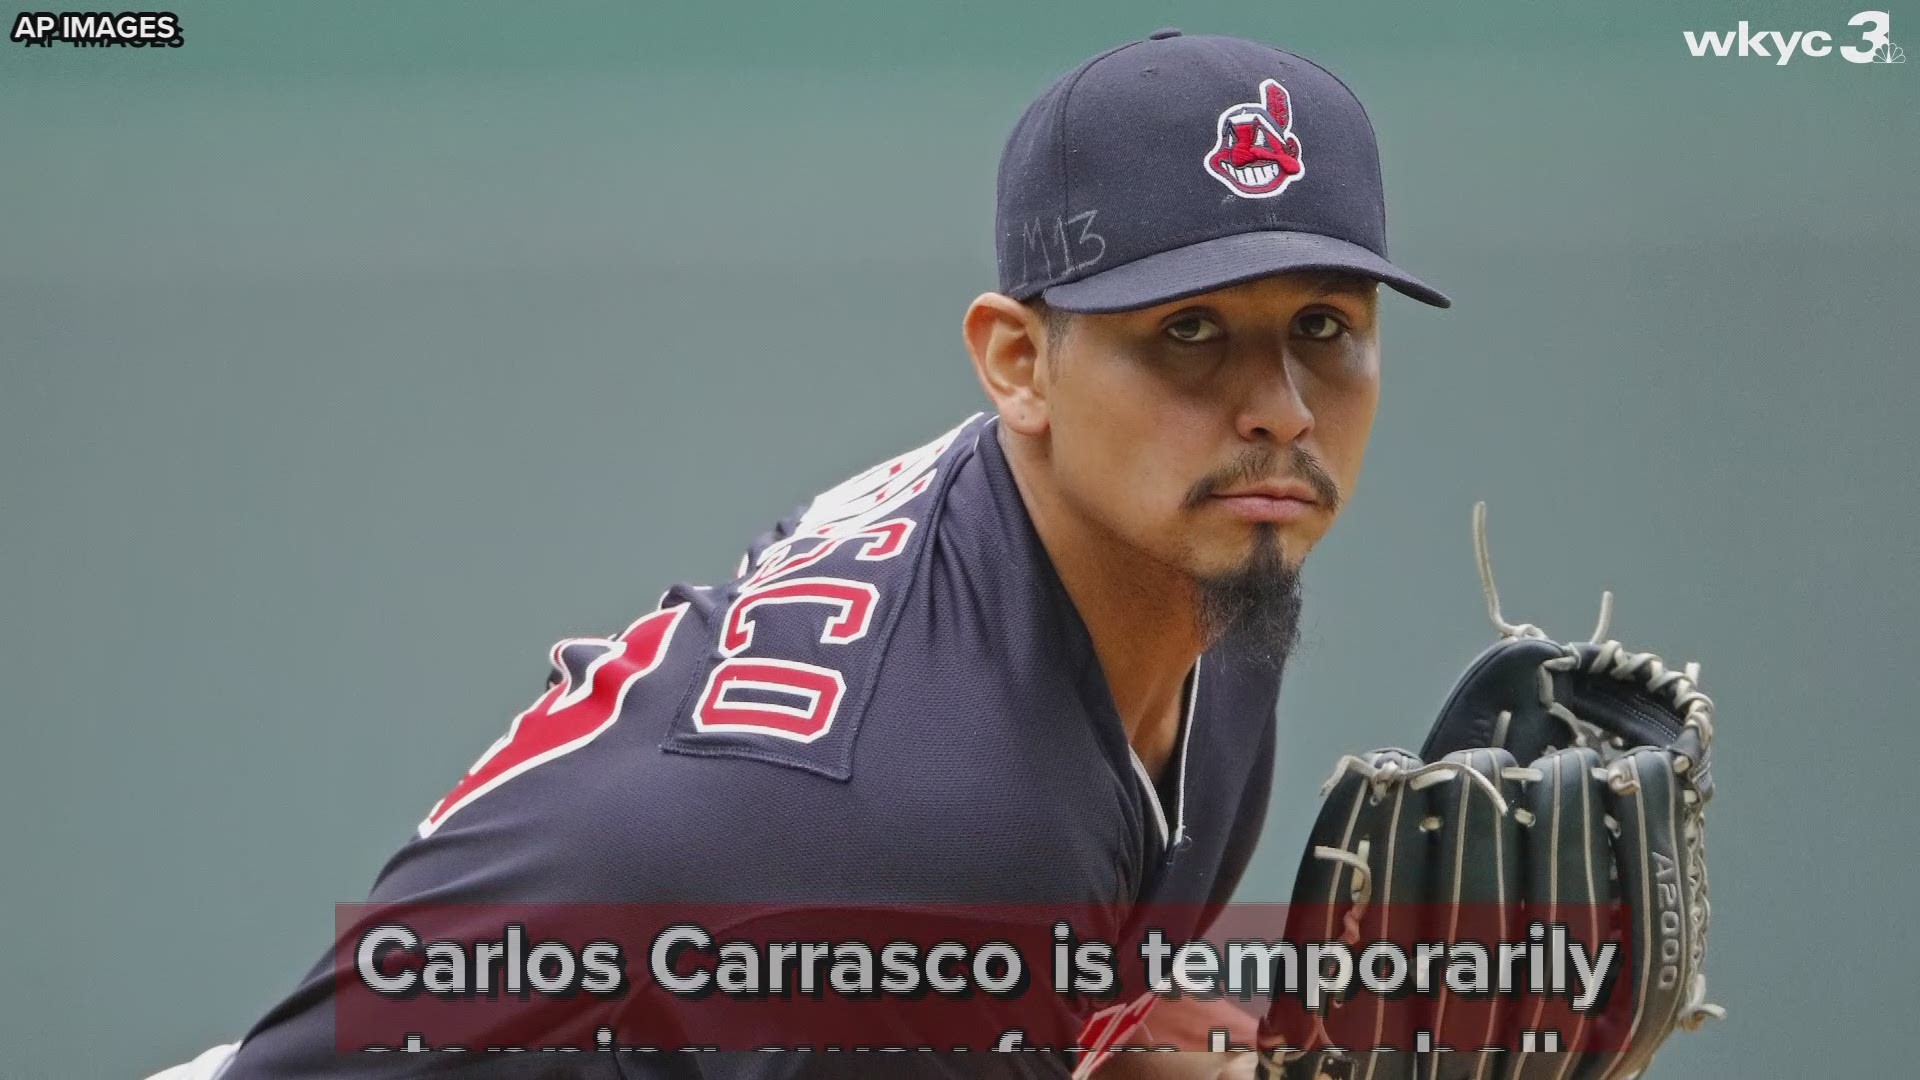 "We ask everyone to keep Carlos and his family in their thoughts during his challenging time."